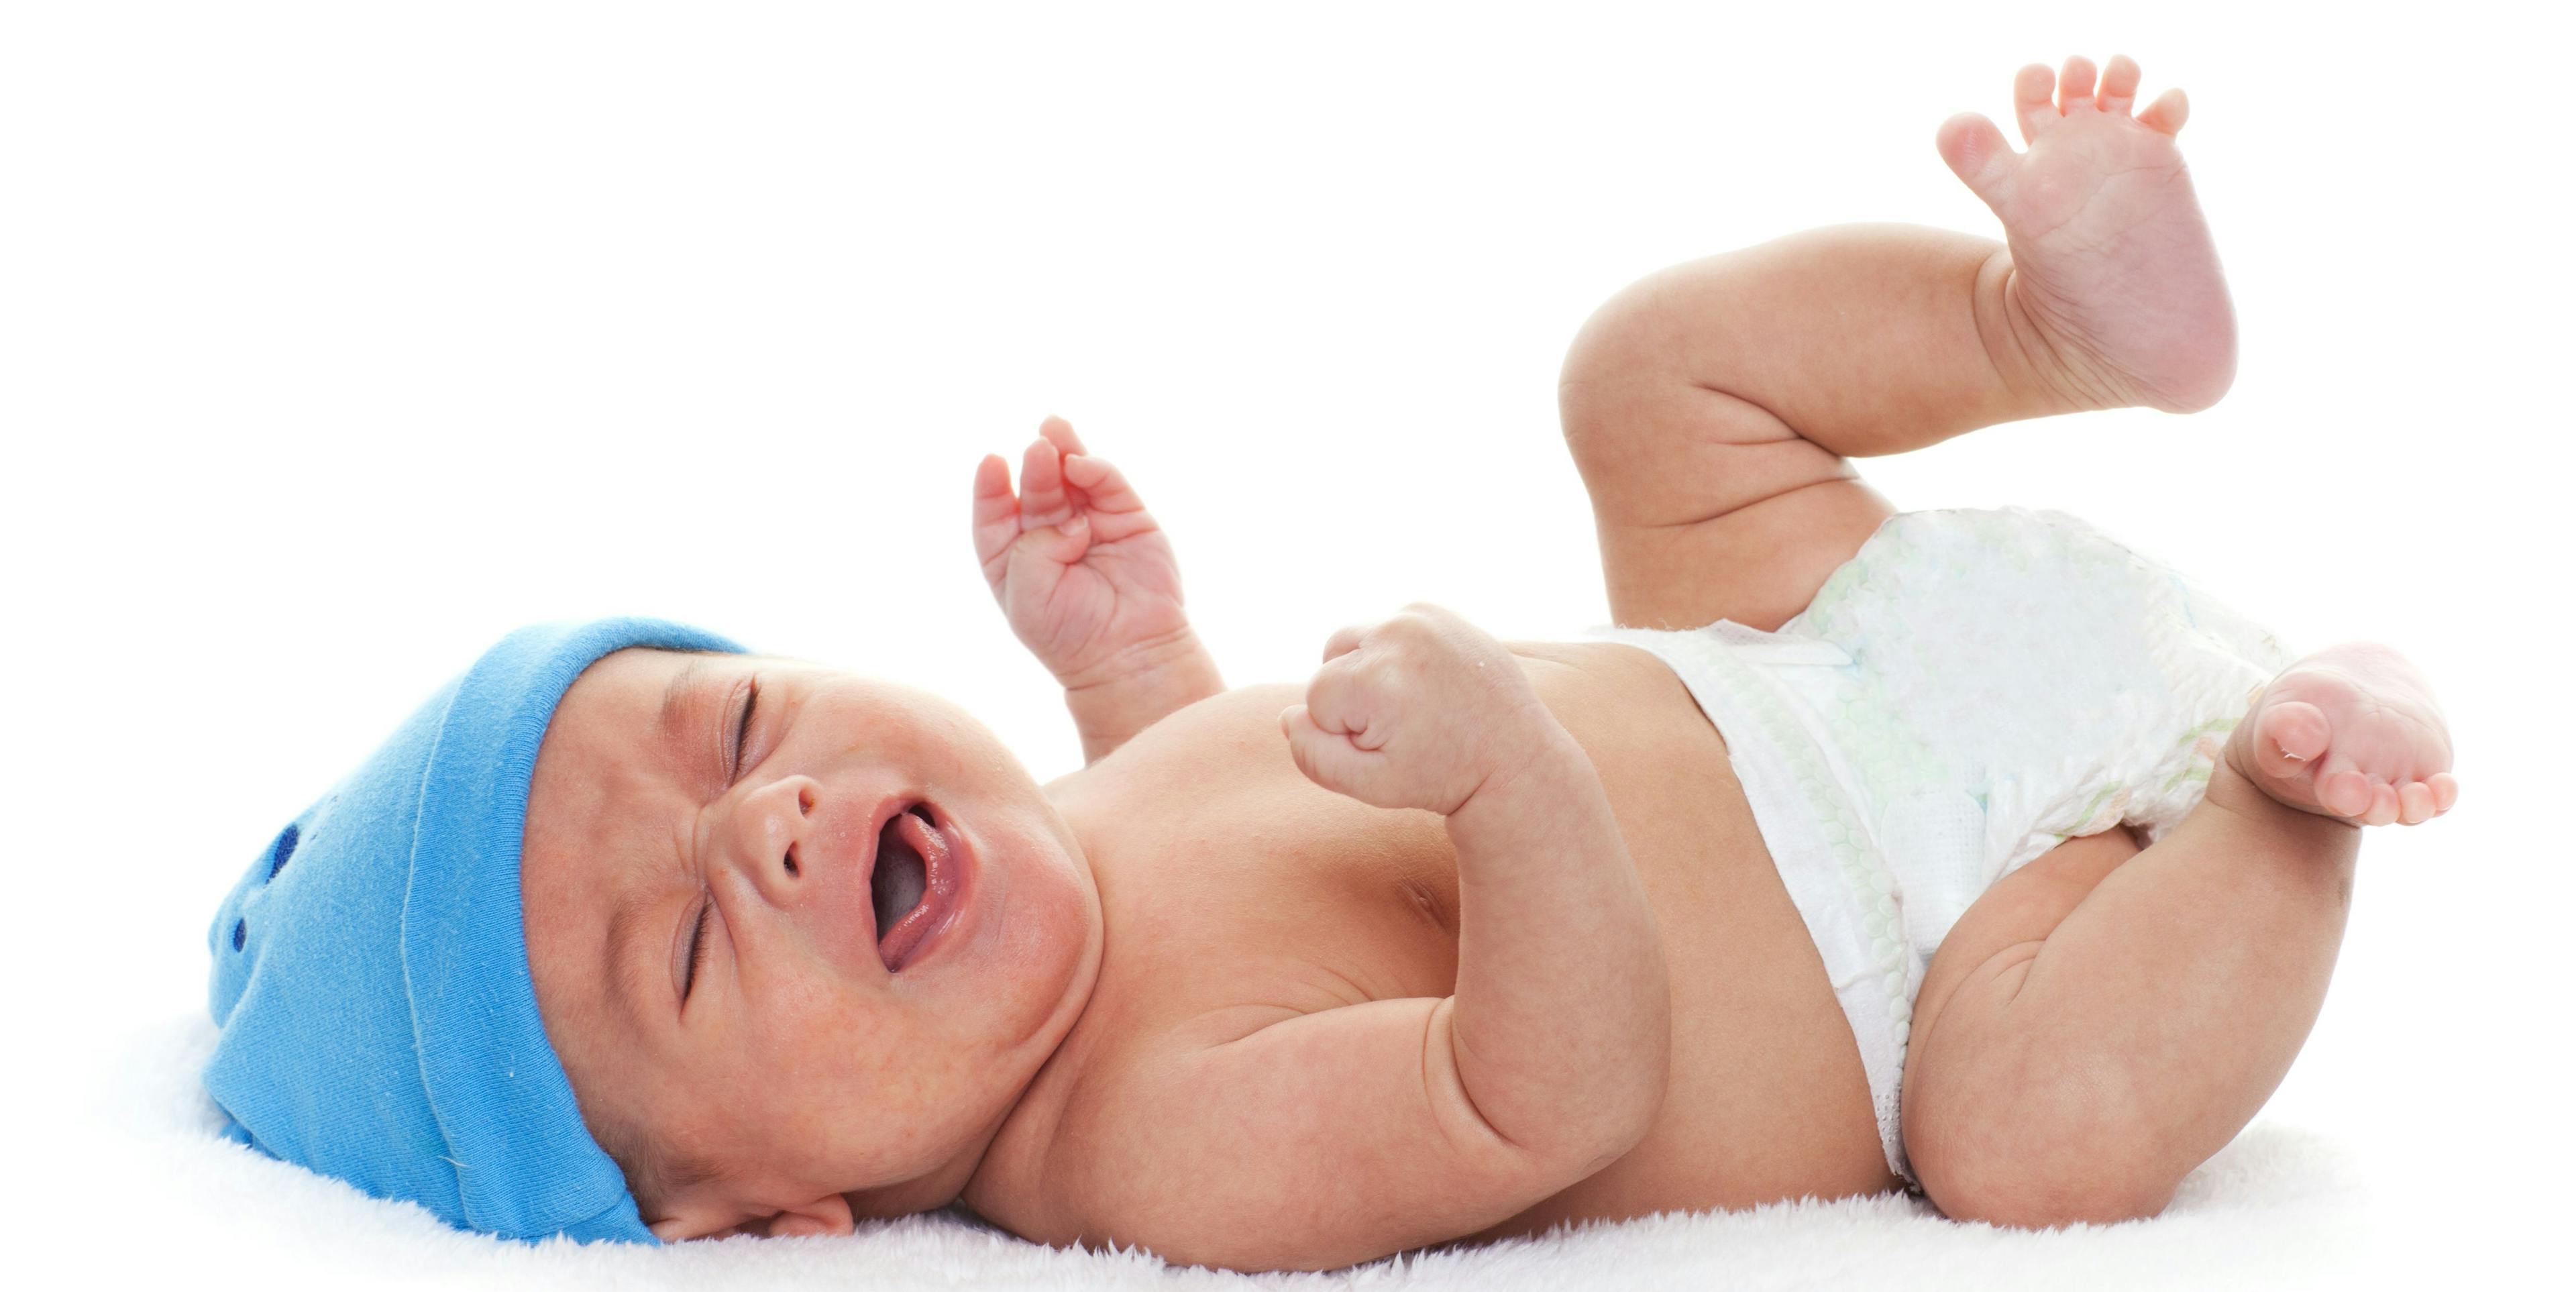 Breast-Fed Babies Exposed to Less Arsenic than Formula-Fed Babies